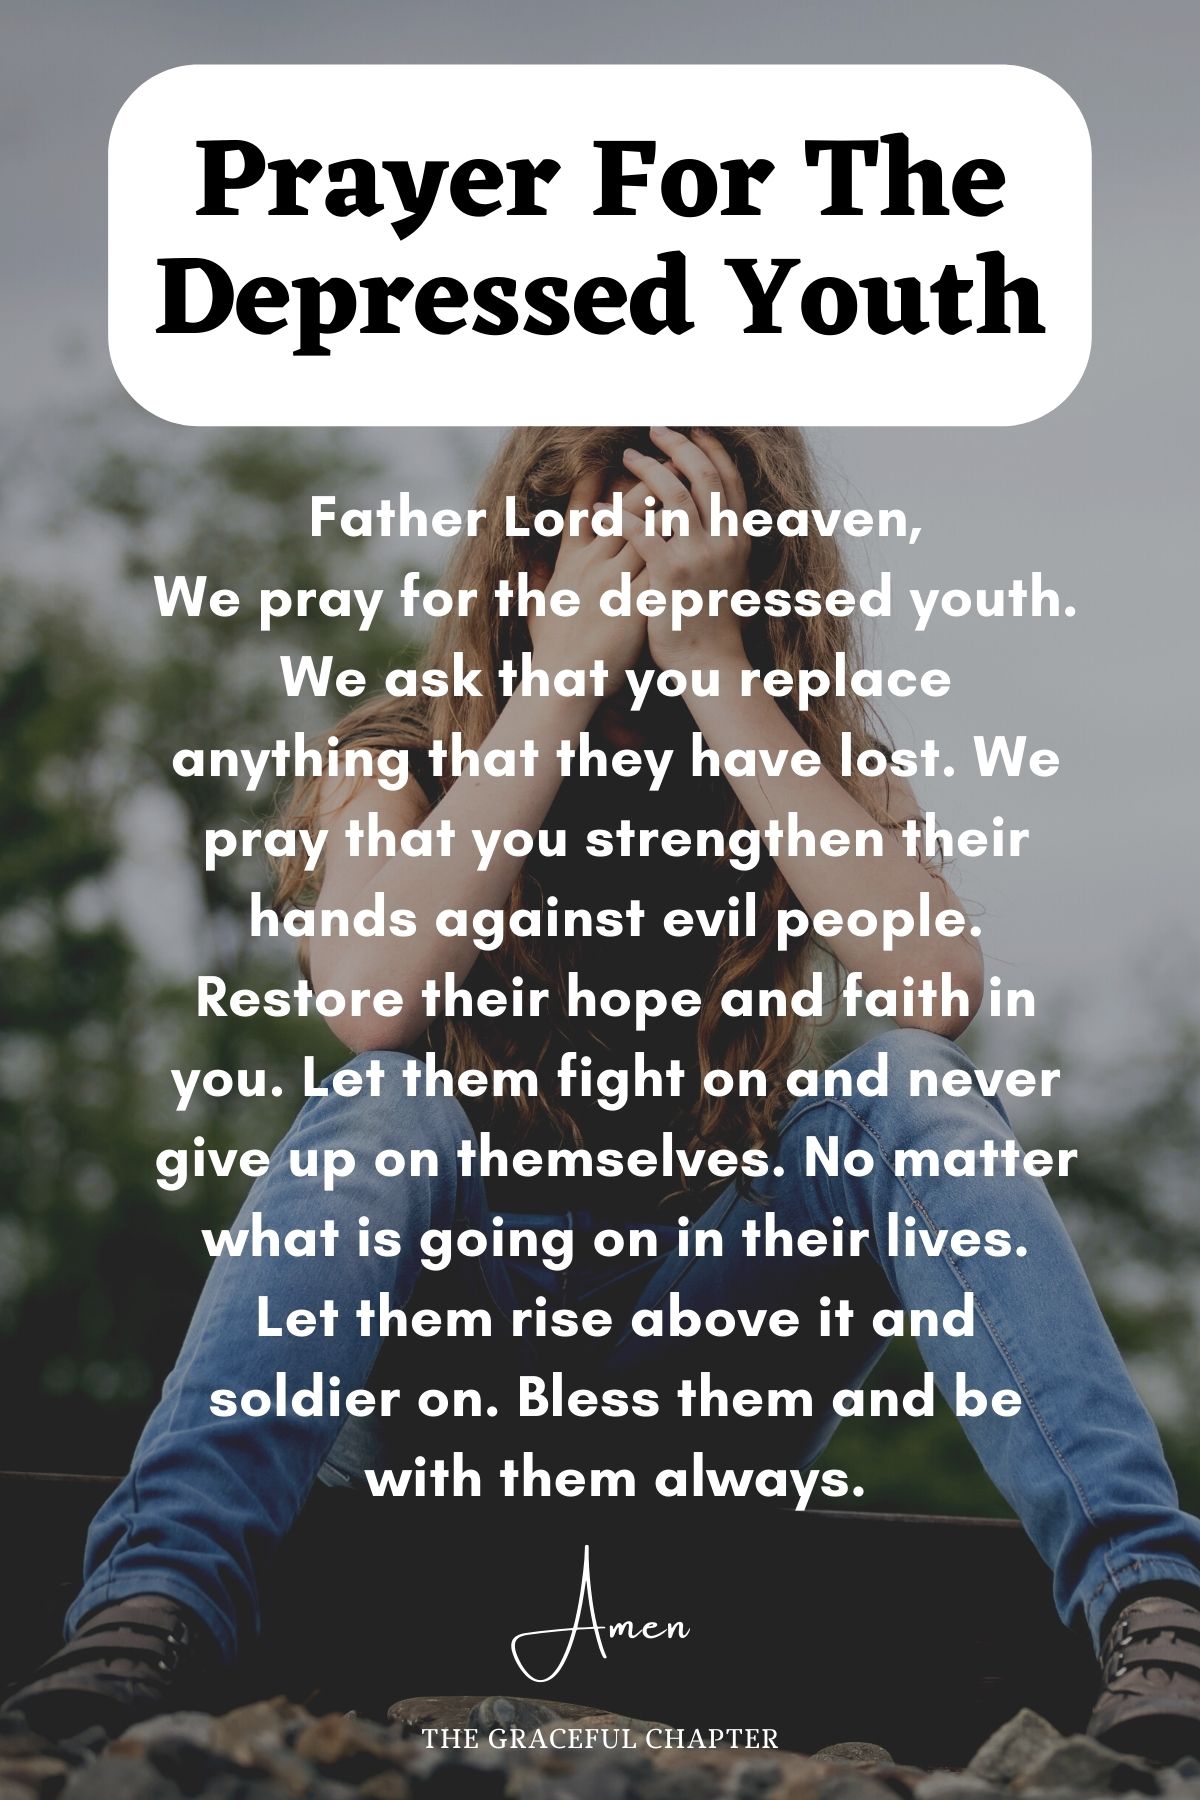 Prayer for the depressed youth